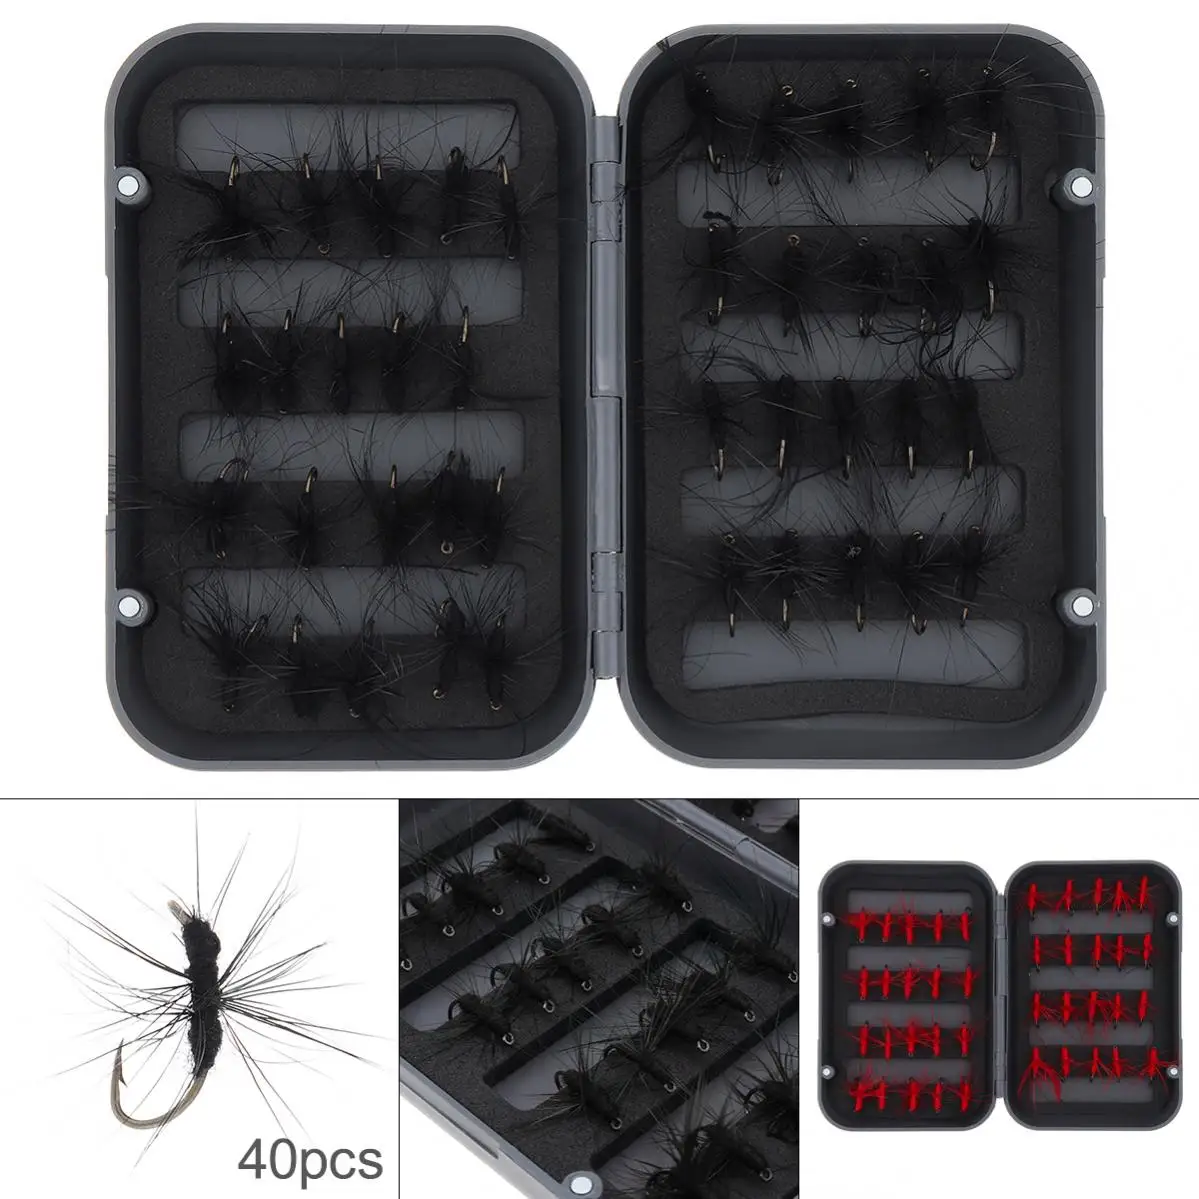 

40pcs/Box Trout Fly Fishing Flies Kit Red Black Ants Artificial Insect Flying Lure Bait for Lake / River / Reservoir Pond